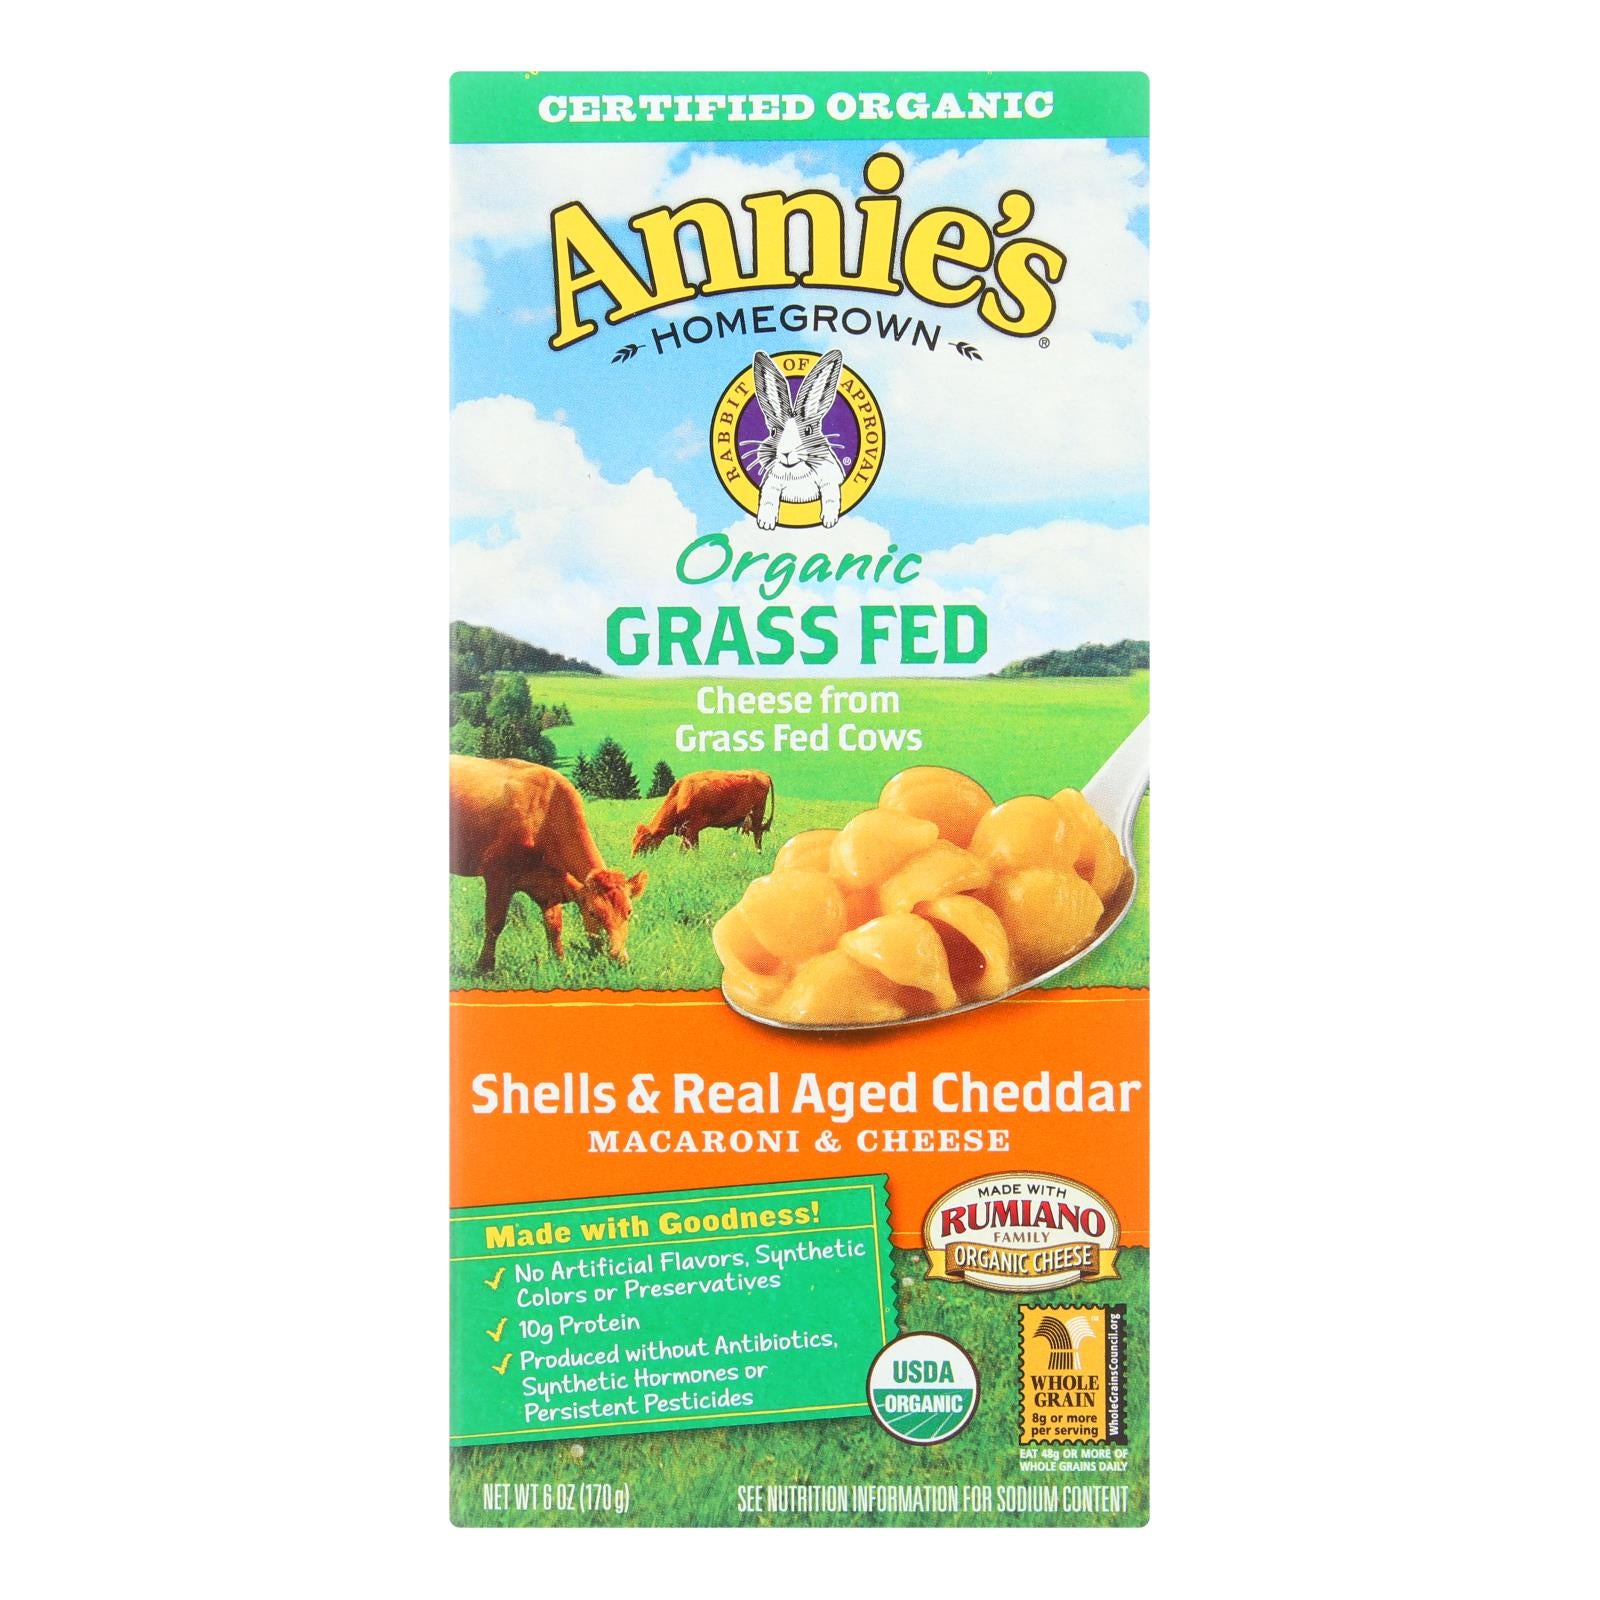 Annie'S Homegrown, Annies Homegrown Macaroni and Cheese - Organic - Grass Fed - Shells and Real Aged Cheddar - 6 oz - case of 12 (Pack of 12)